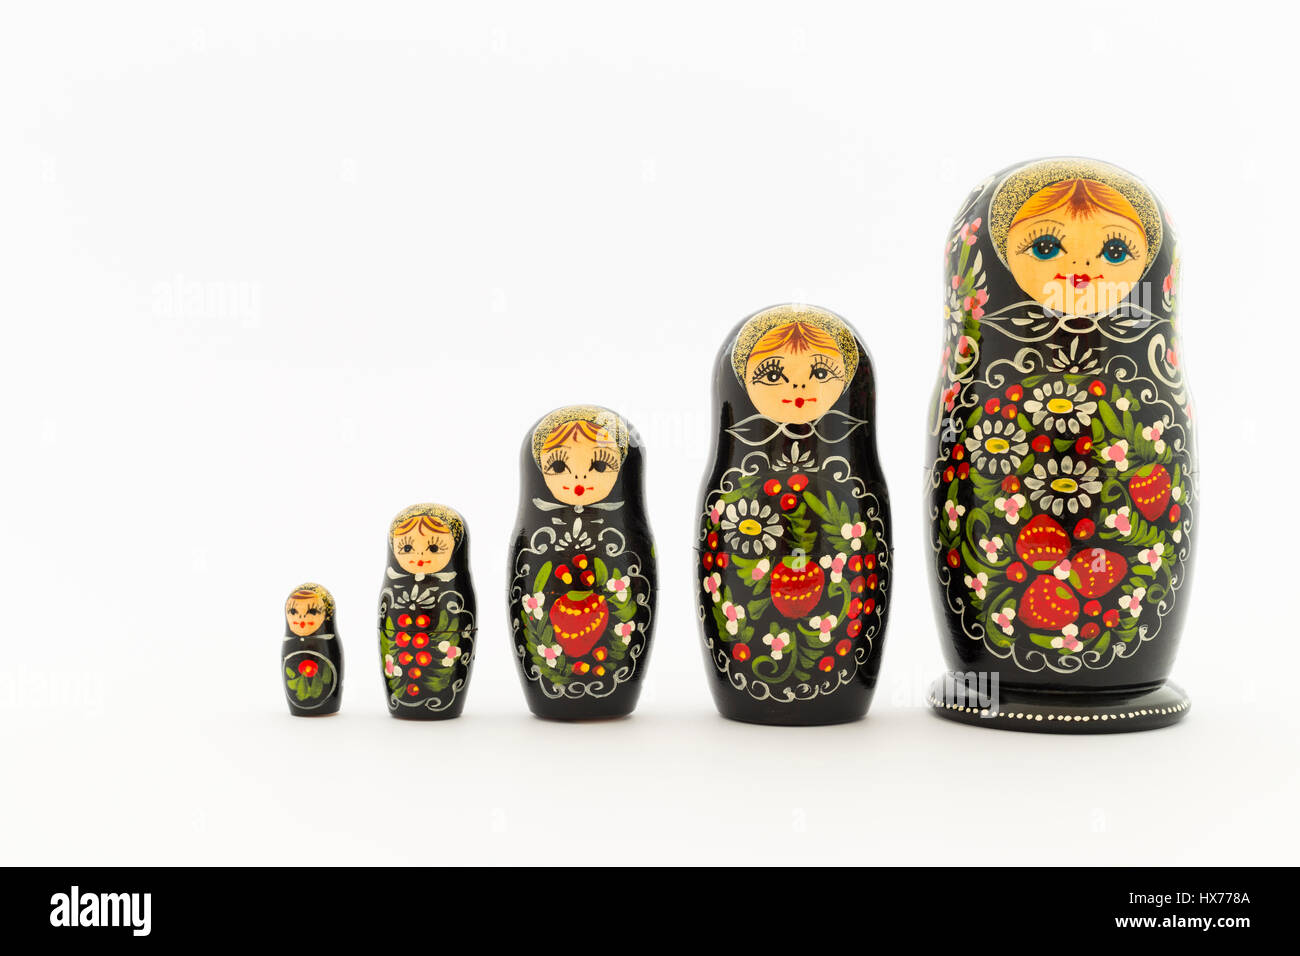 Beautiful black russian nesting dolls (matryoshka dolls) with white, green and red painting in front of white background Stock Photo